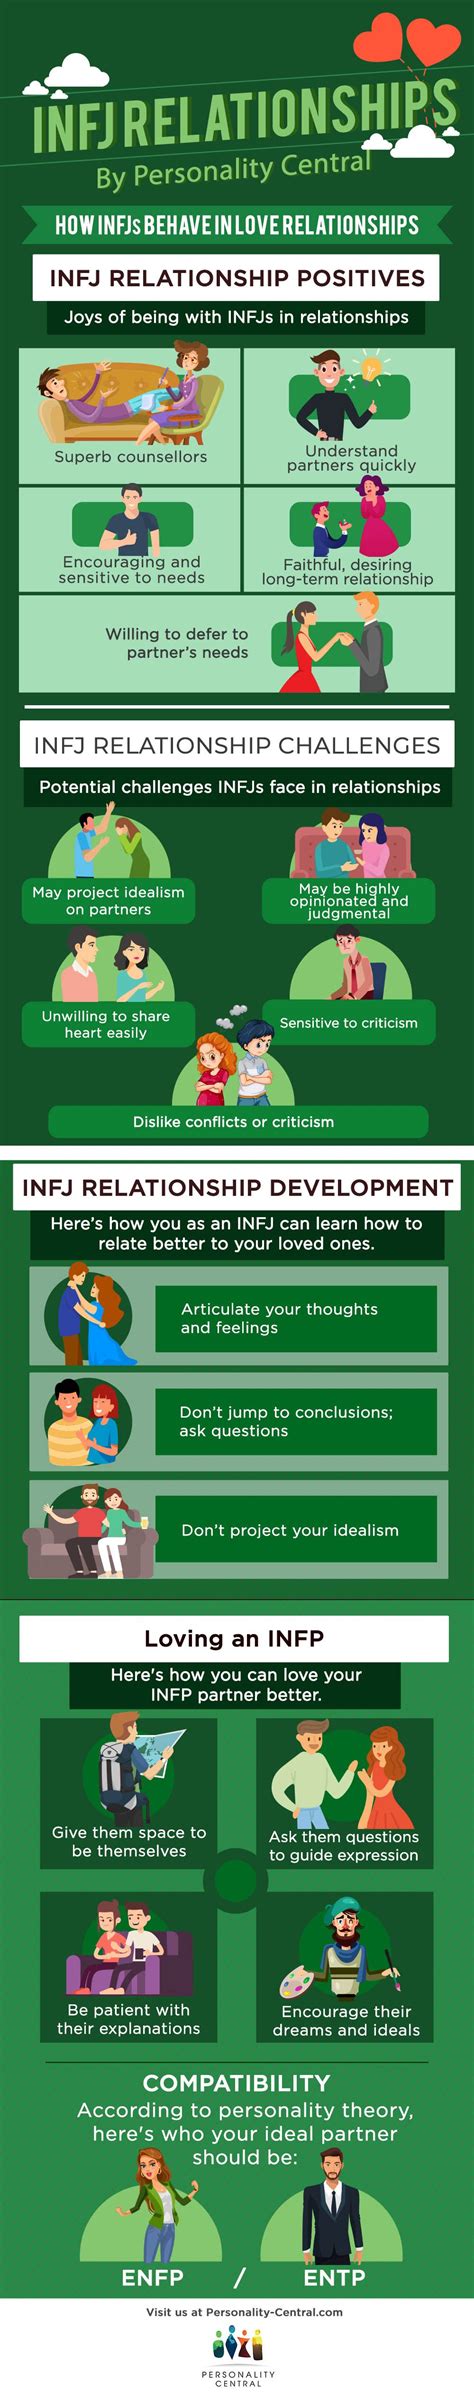 Infographic How Infjs Behave In Love Relationships The Good Bad